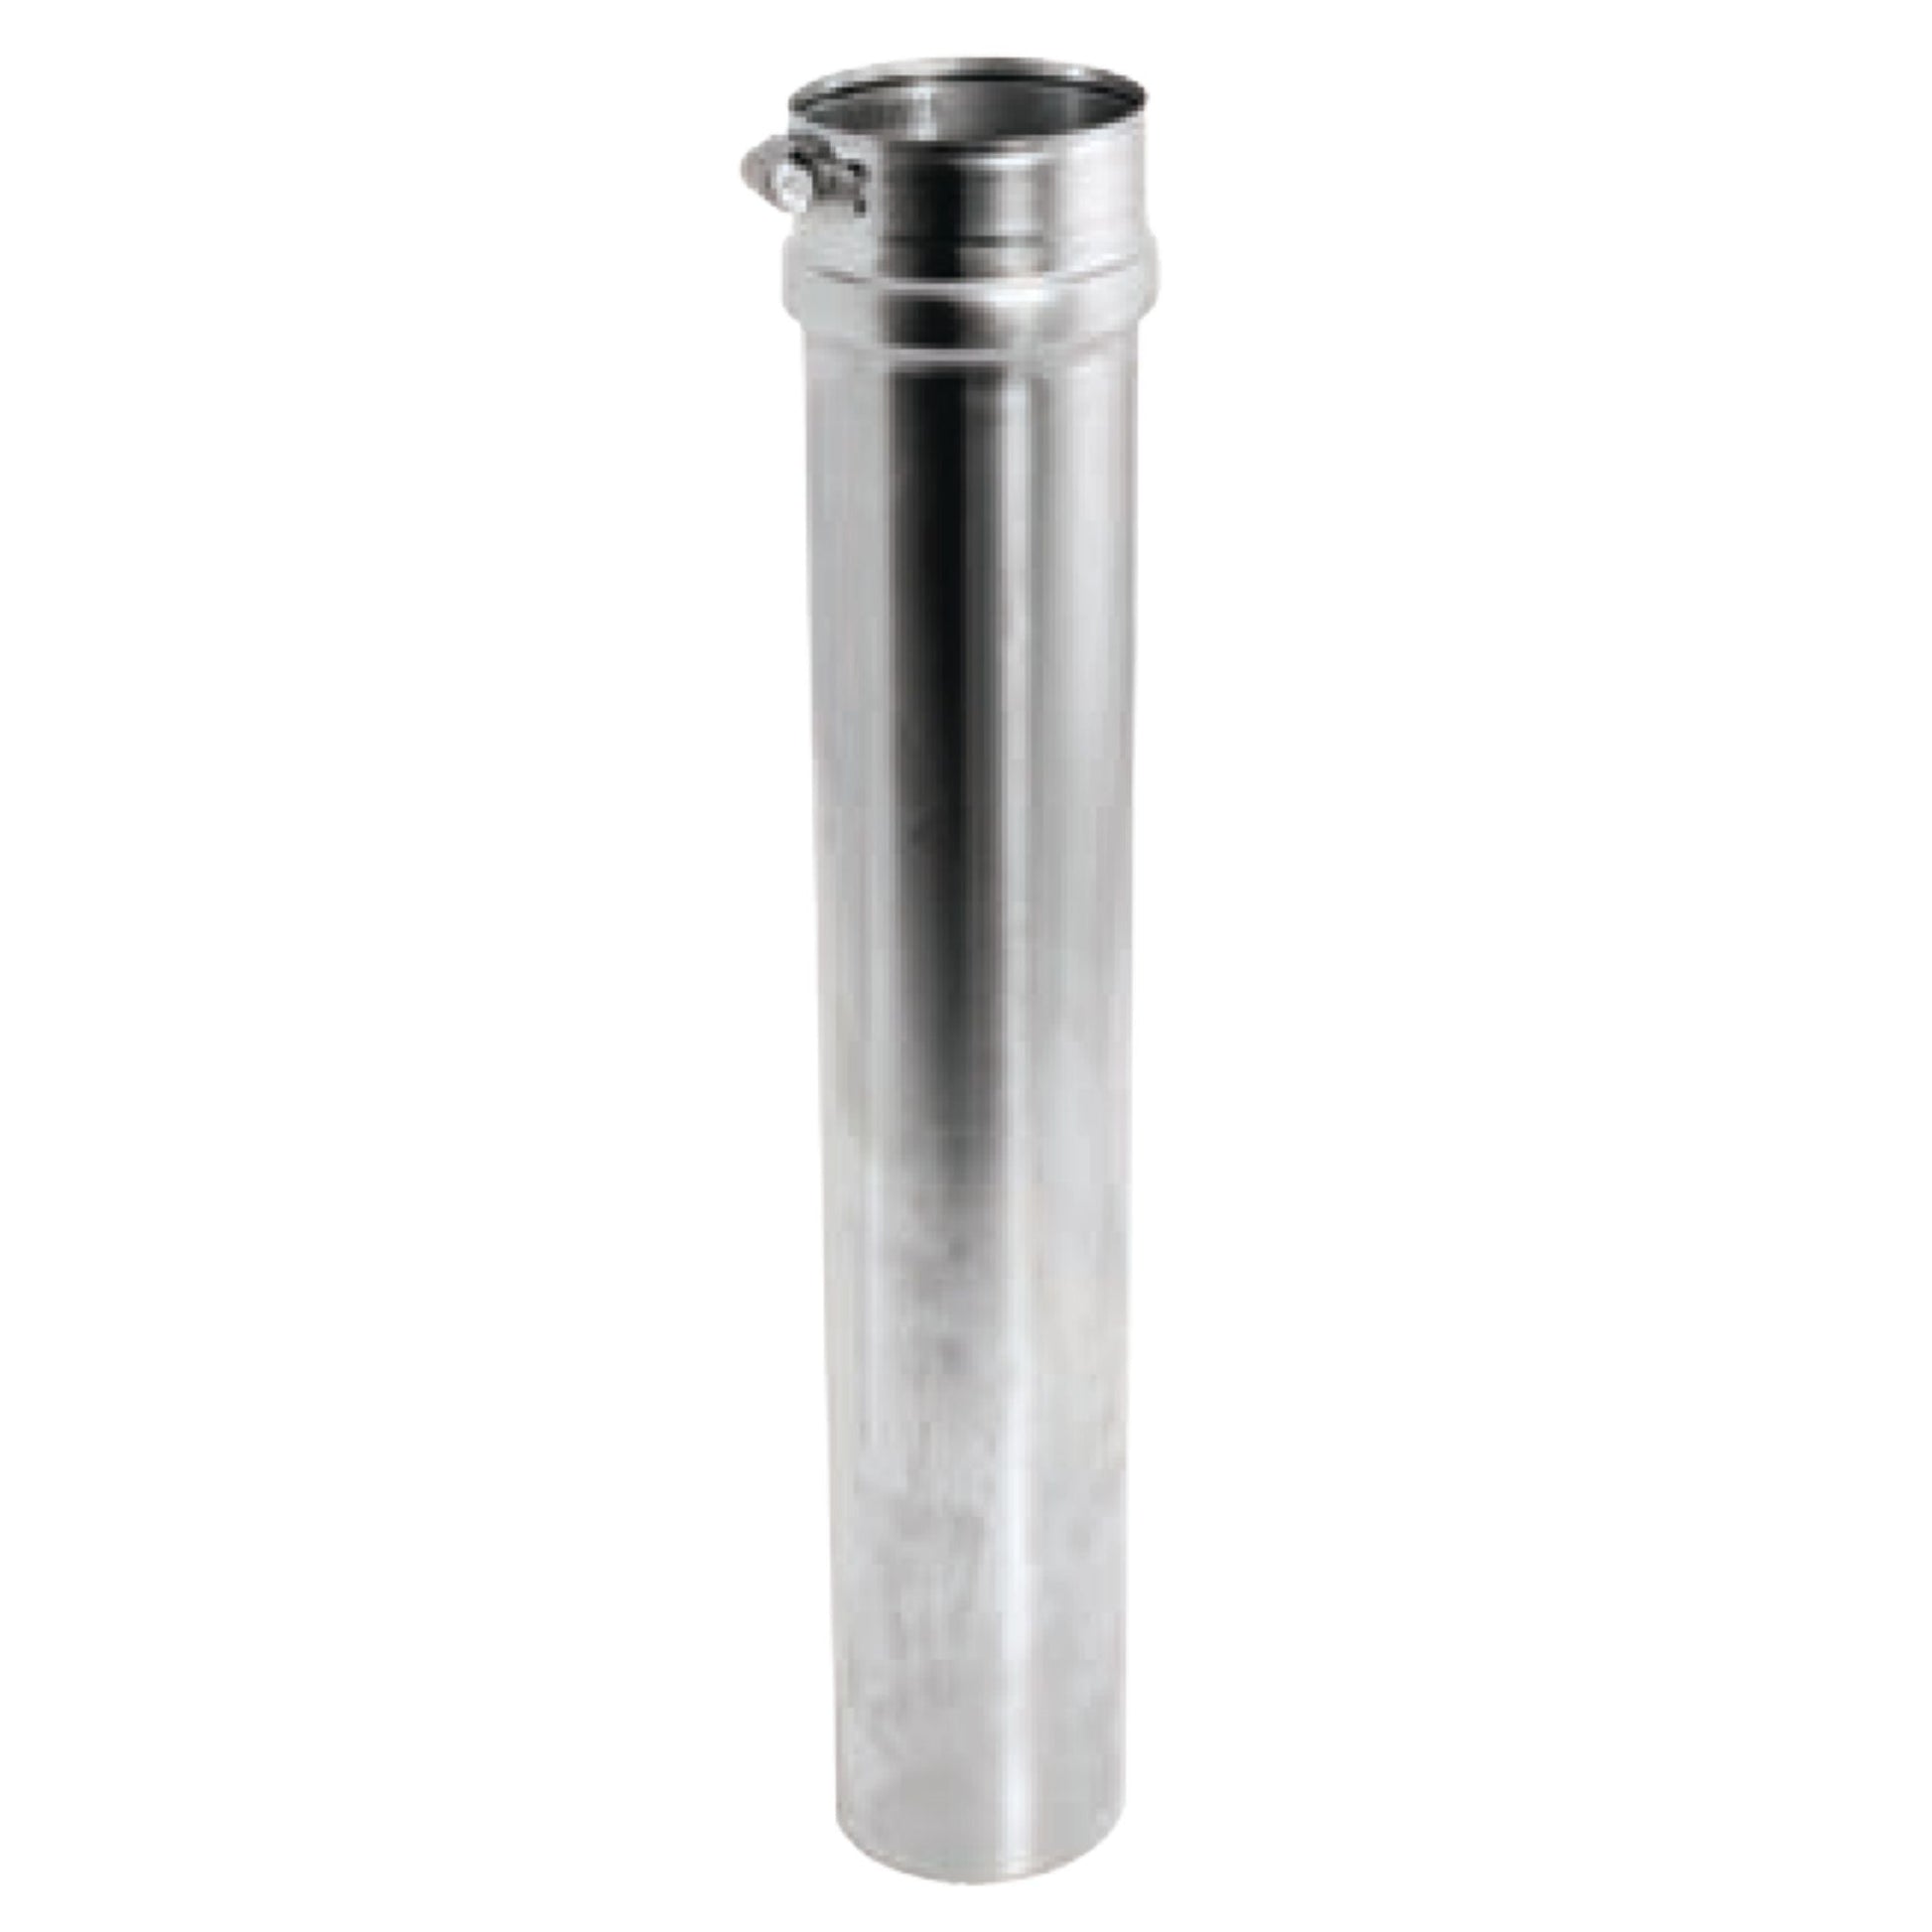 DuraVent FasNSeal 5" x 18" 316L Stainless Steel Adjustable Vent Length